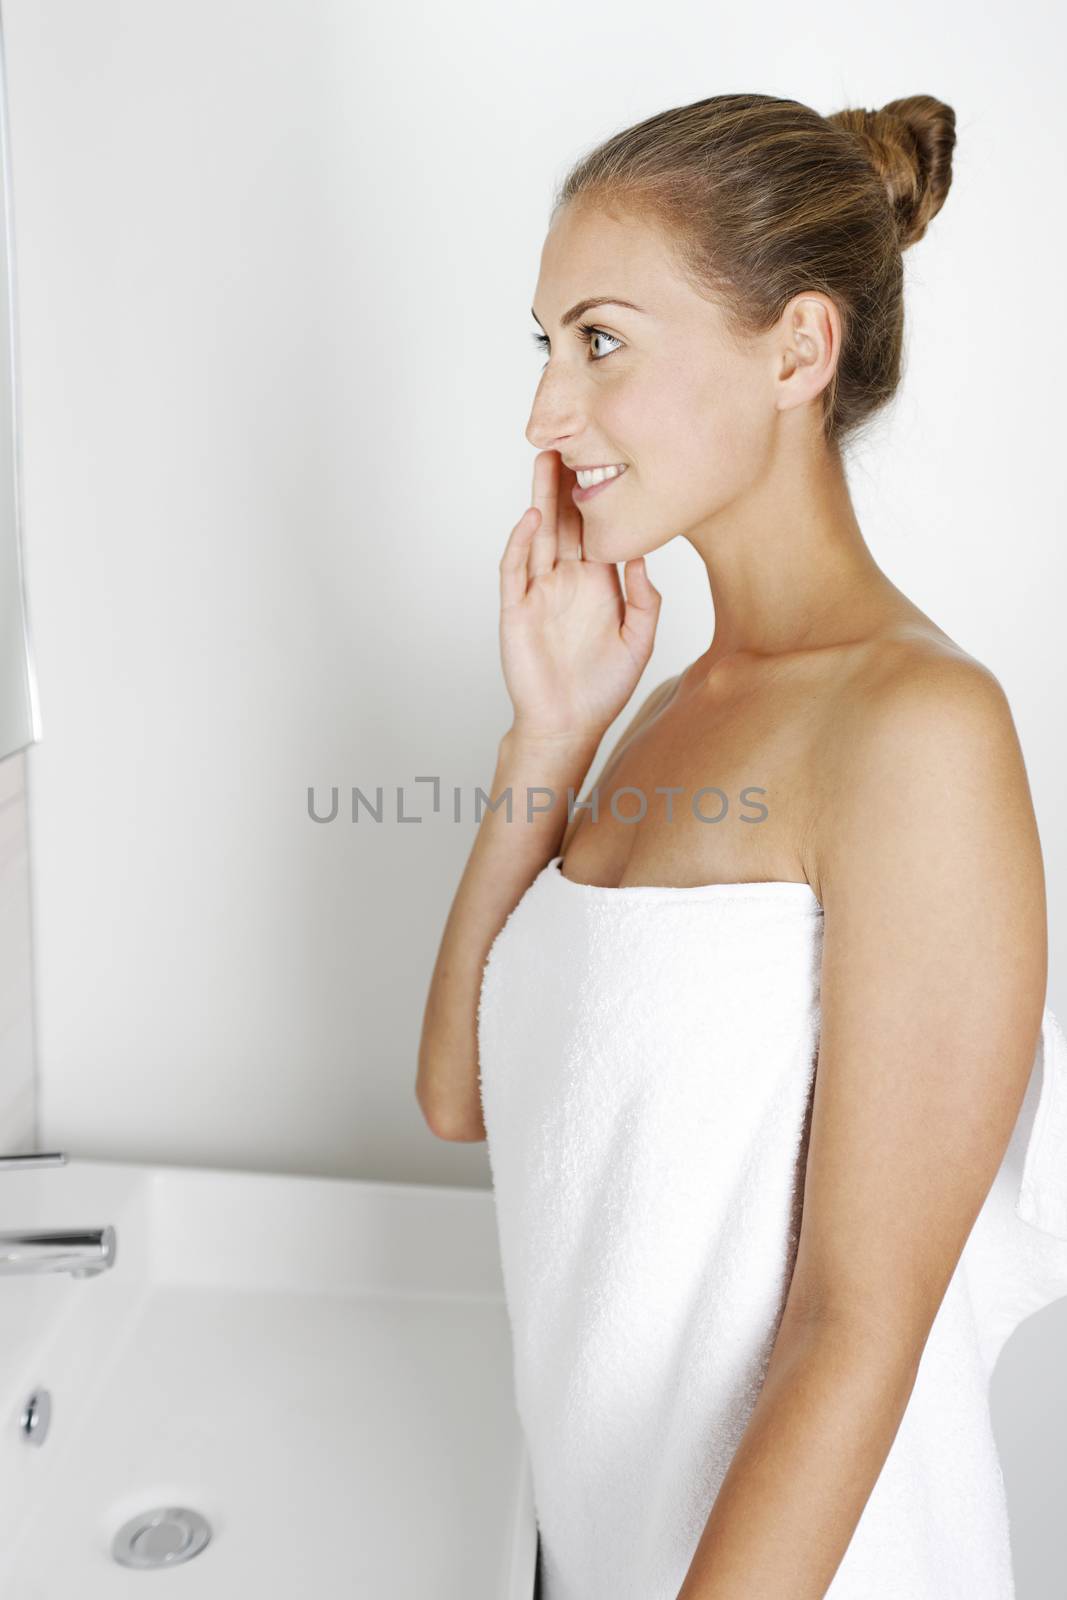 Attractive young woman in her bathroom getting ready.